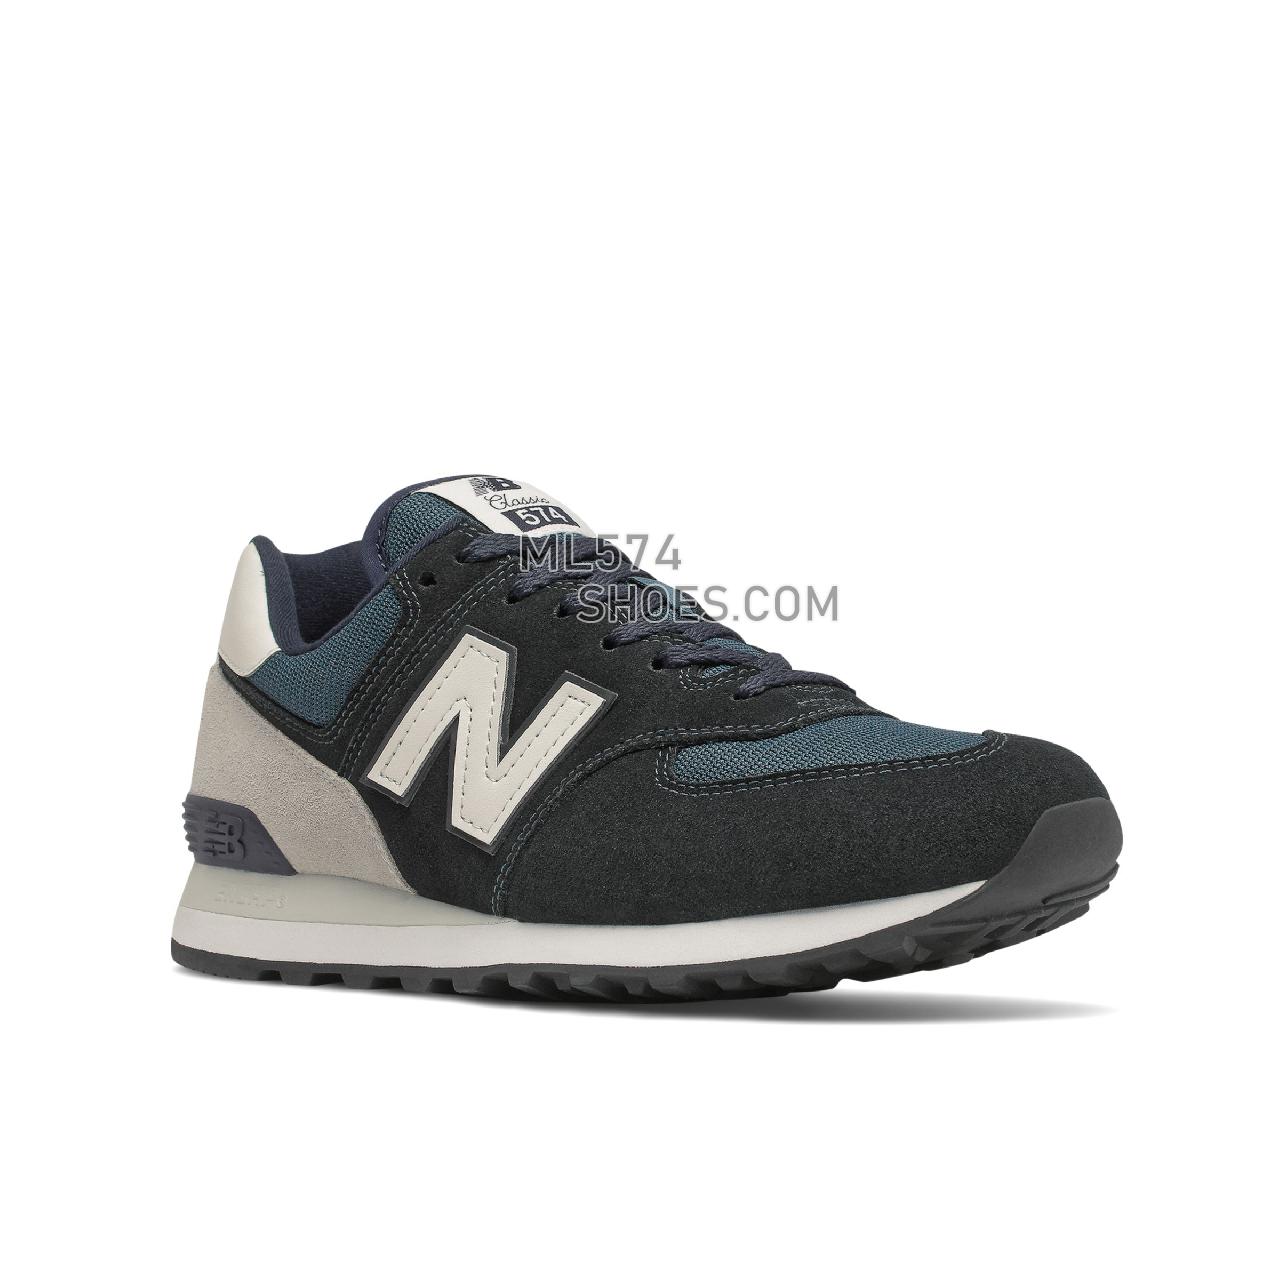 New Balance 574v2 - Unisex Men's Women's Classic Sneakers - Eclipse with Nb White - ML574BD2